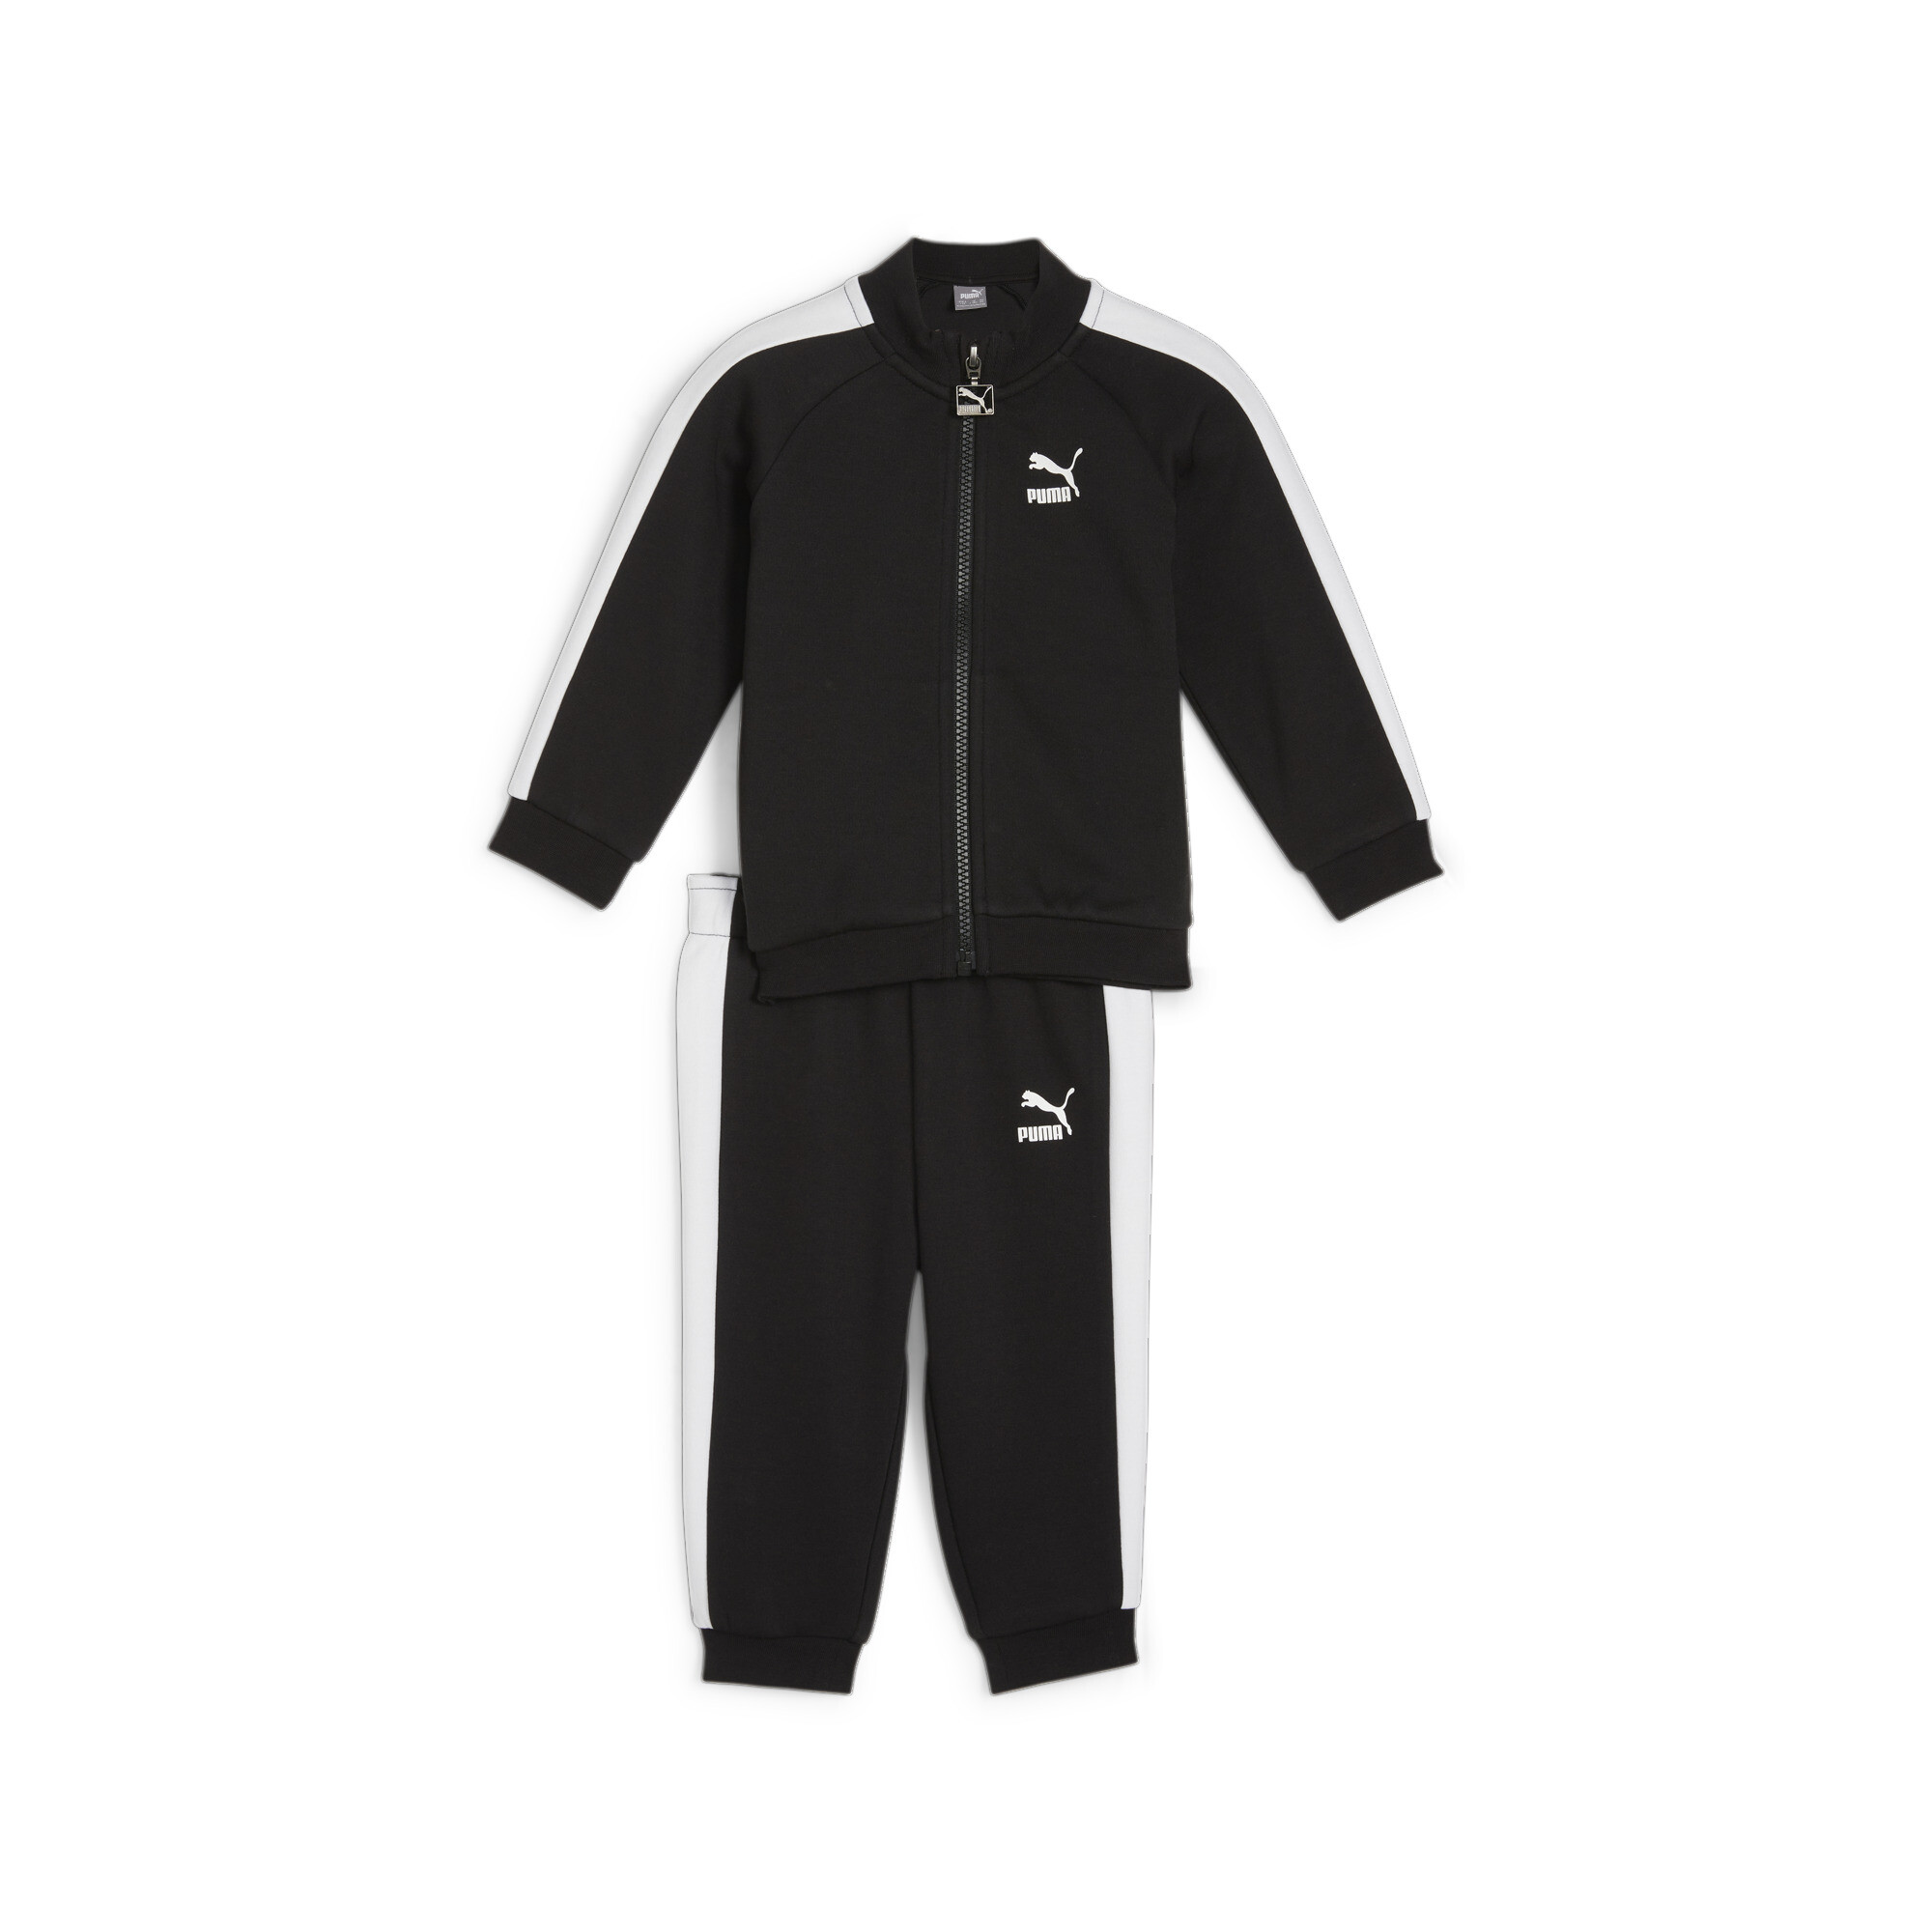 Kids' PUMA MINICATS T7 ICONIC Baby Tracksuit Set In 10 - Black, Size 6-9 Months